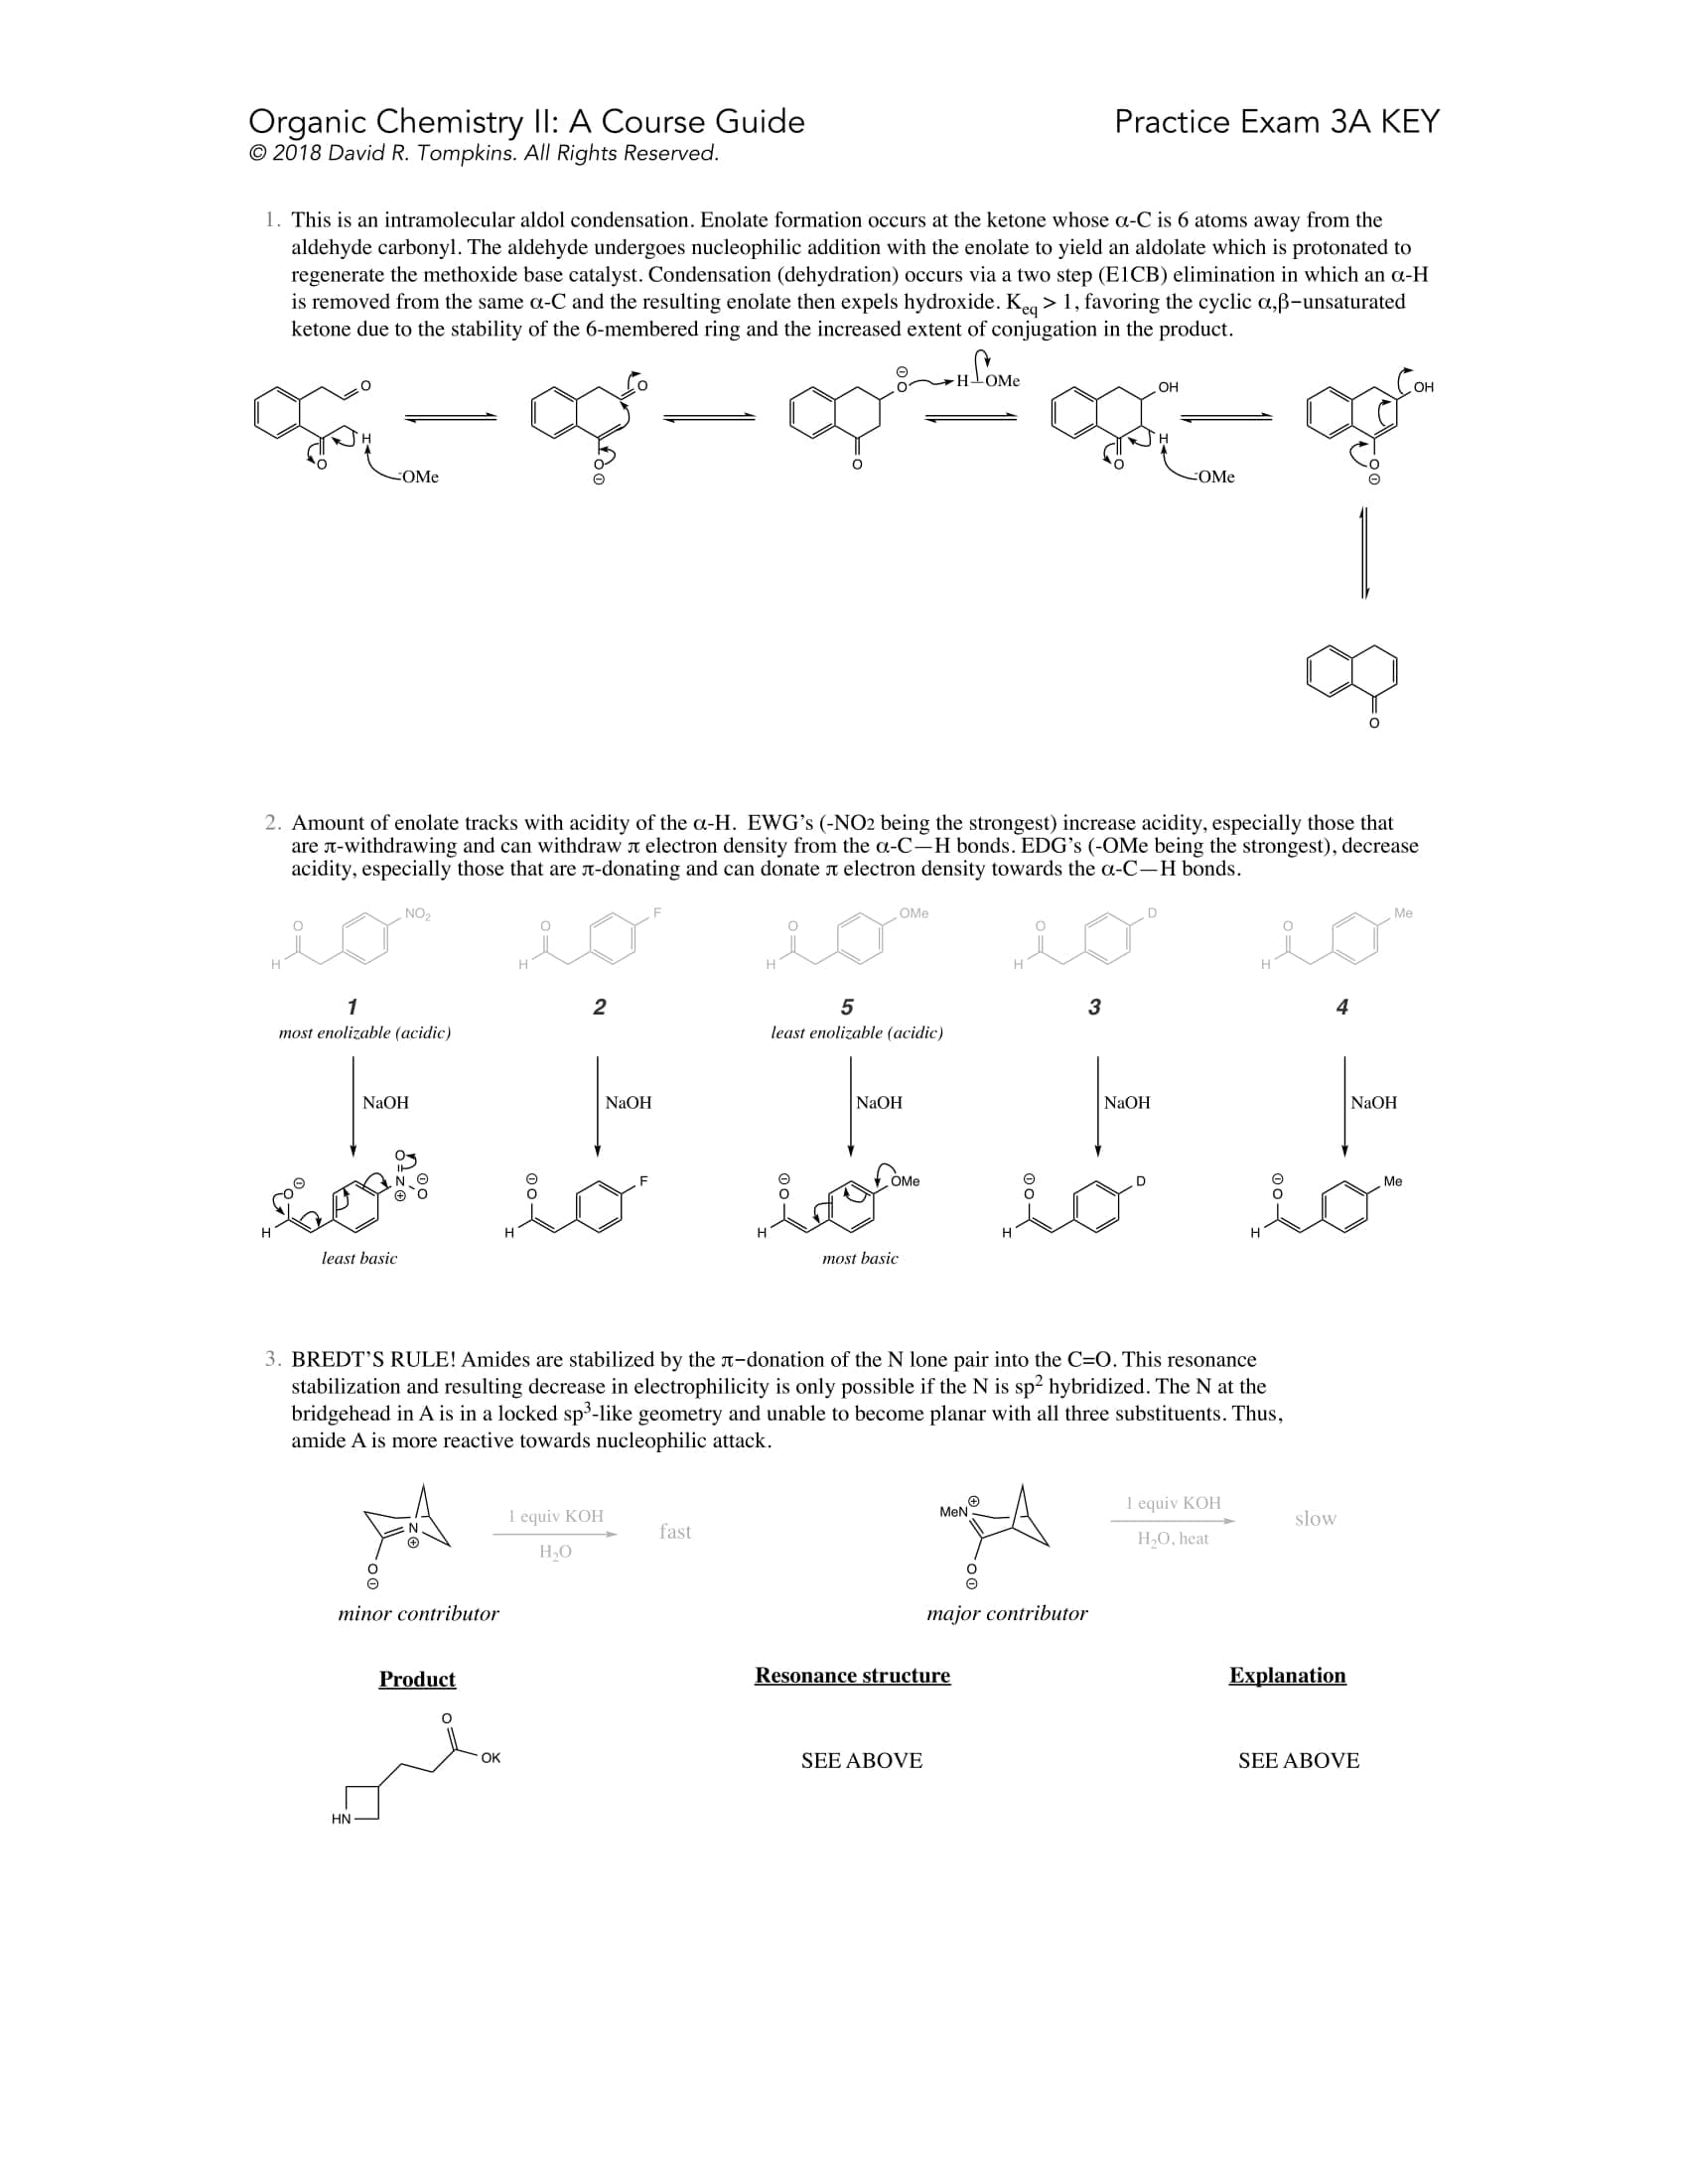 Introduction to Organic Chemistry II Course Guide Example Page 2